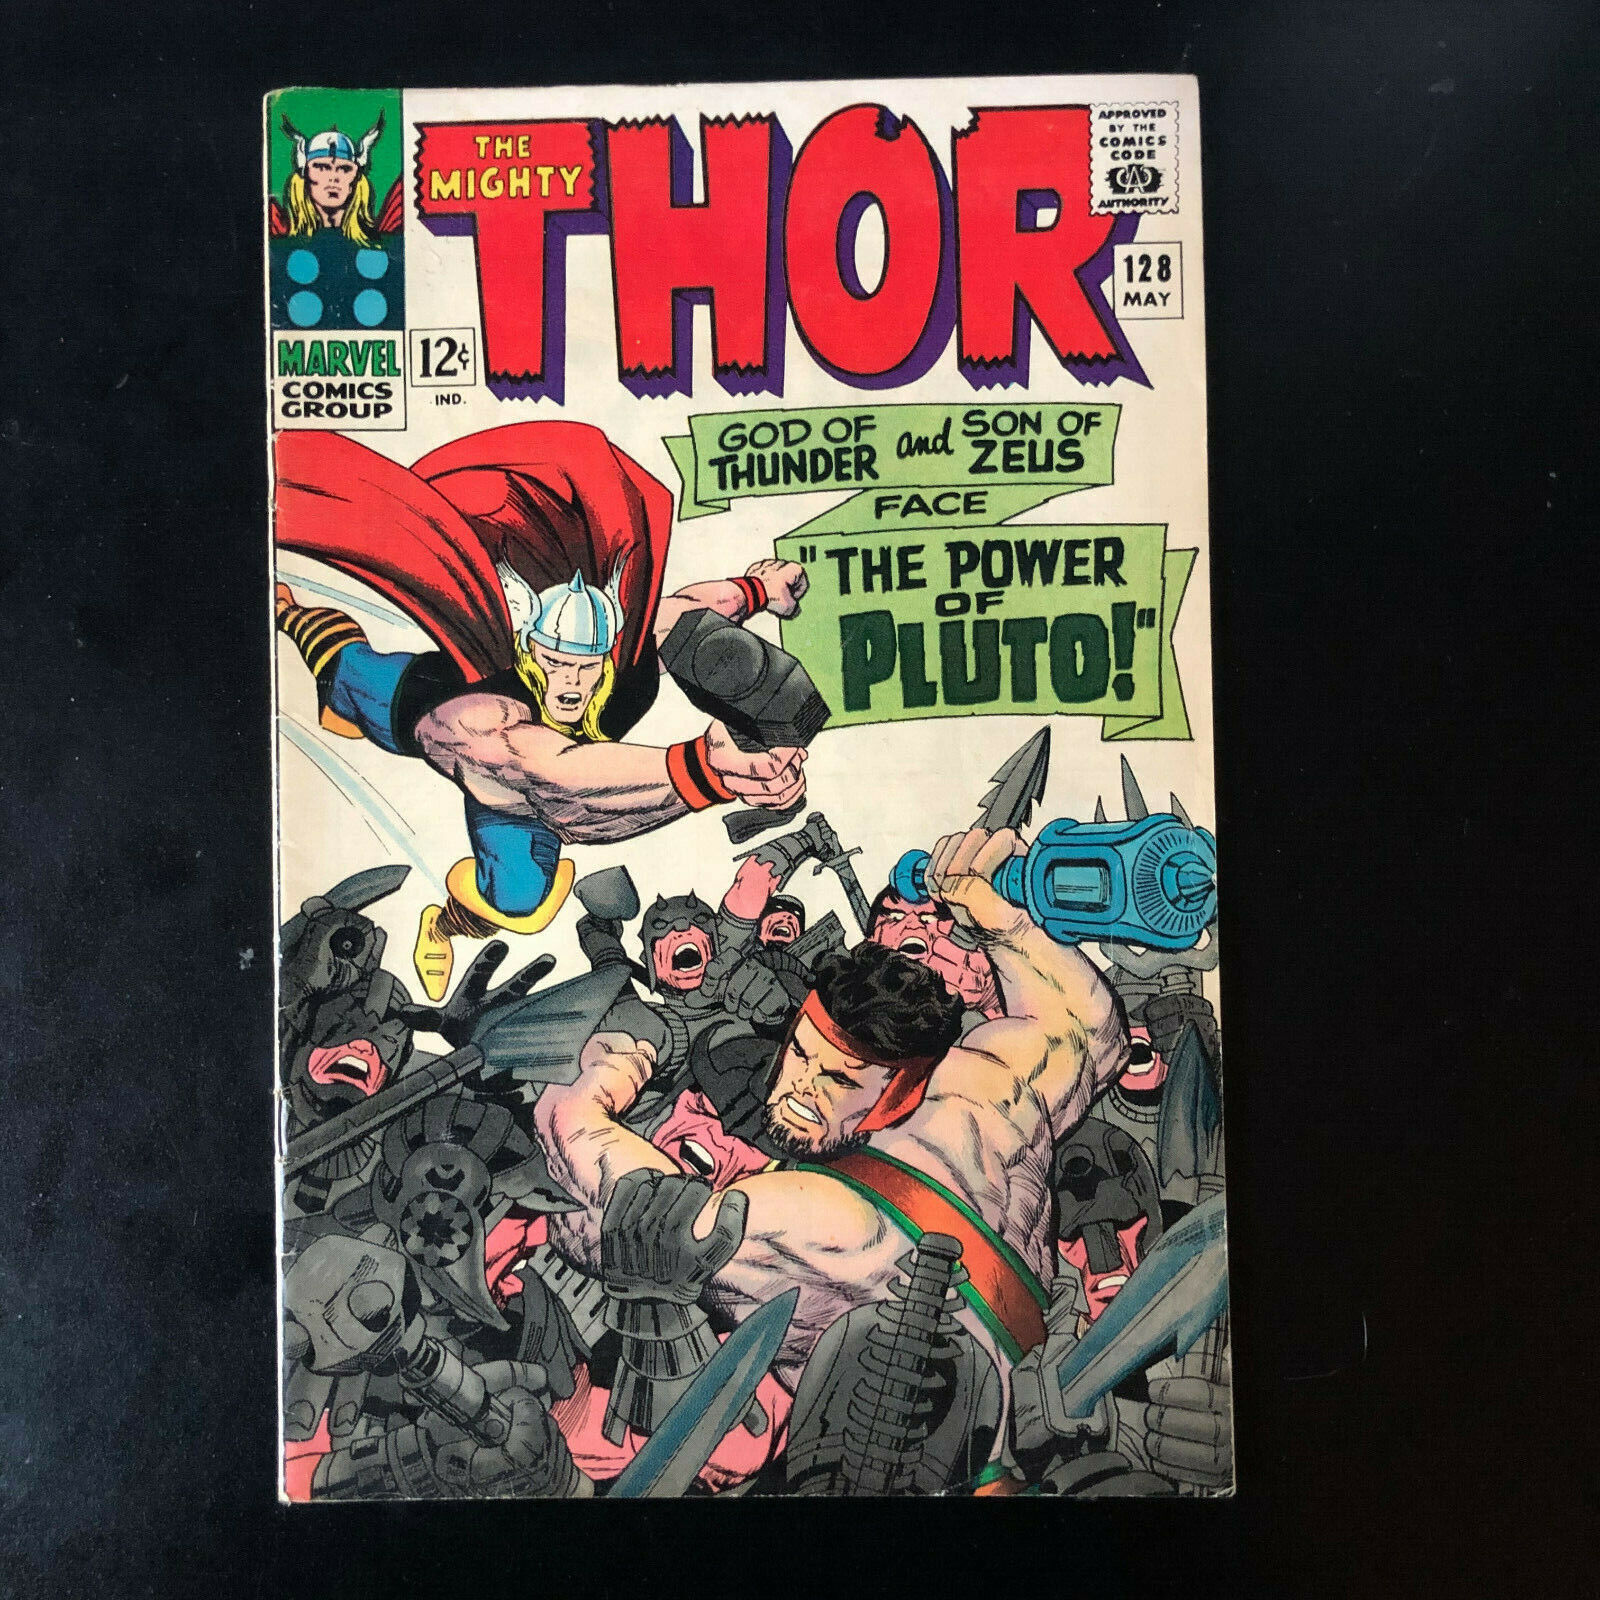 The Mighty Thor #128 